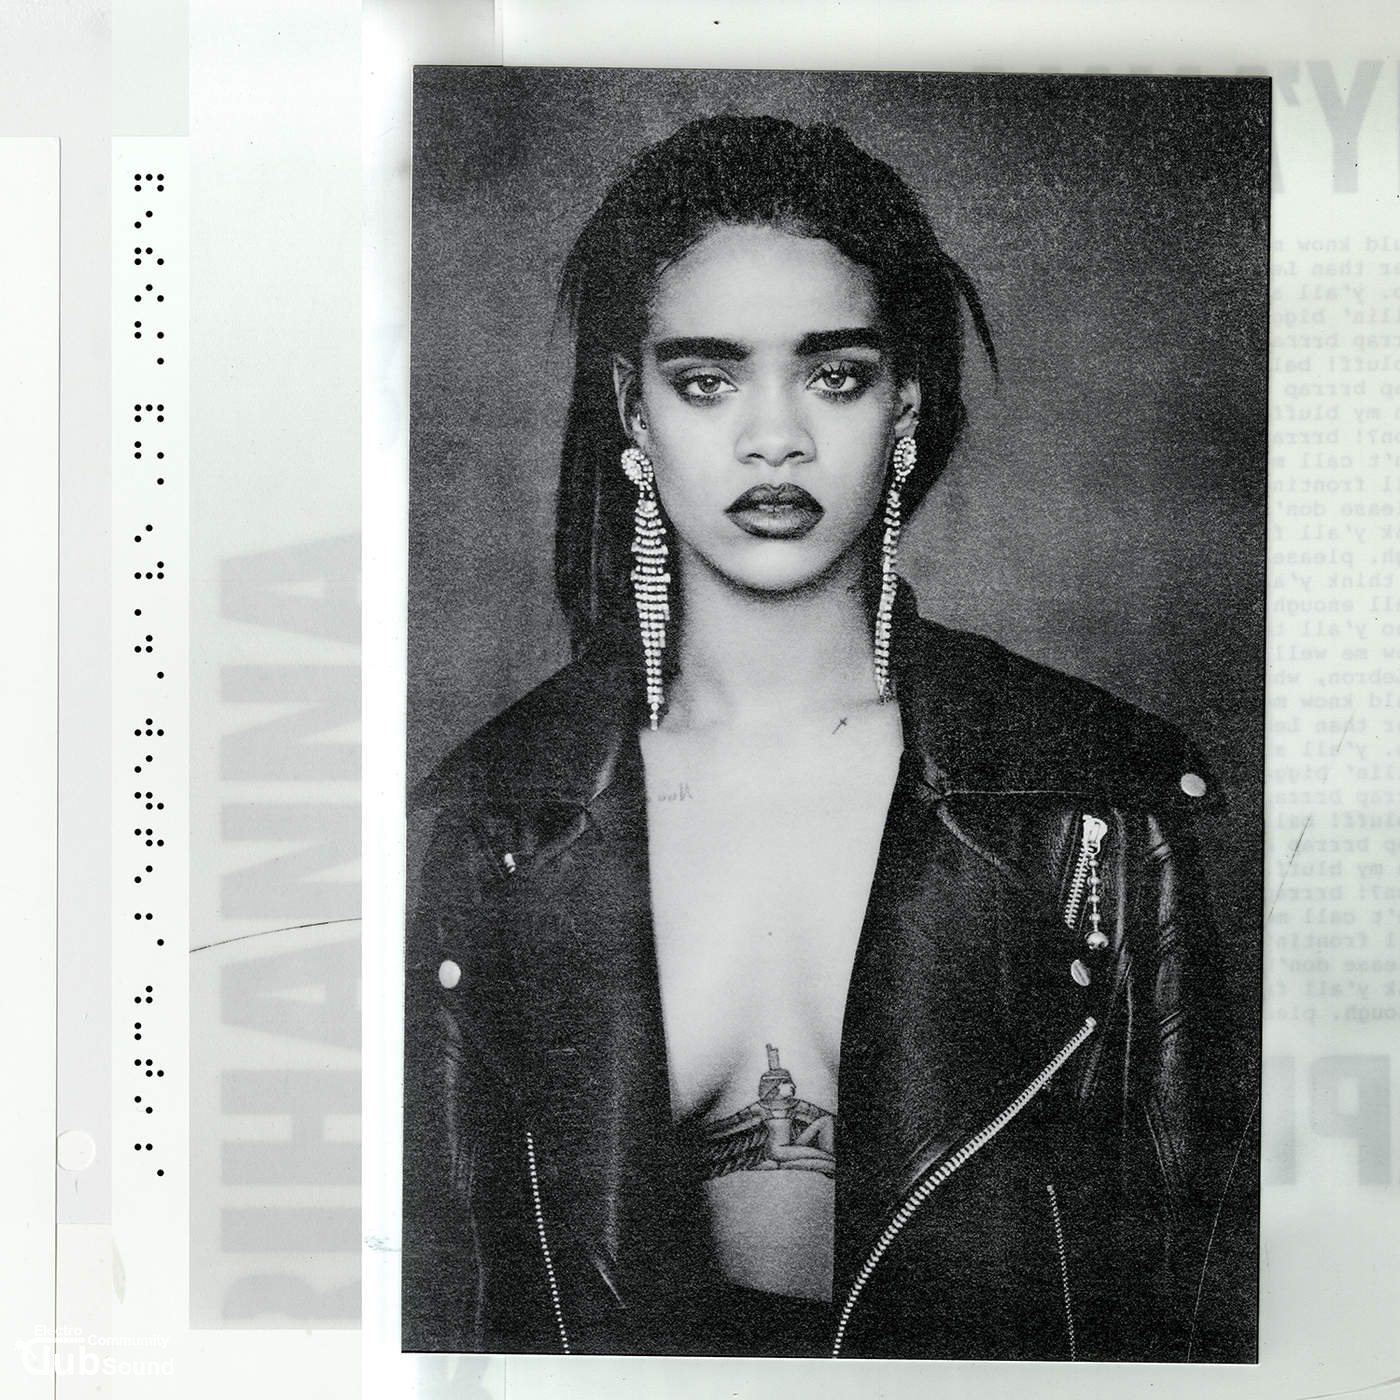 rihanna-bitch-better-have-my-money-cover.png : 5랜10000입니더!~!! 막장입니더!Rihanna - Bitch Better Have My Money (LINTAII 'KIMONO' Bootleg) ★★★★★